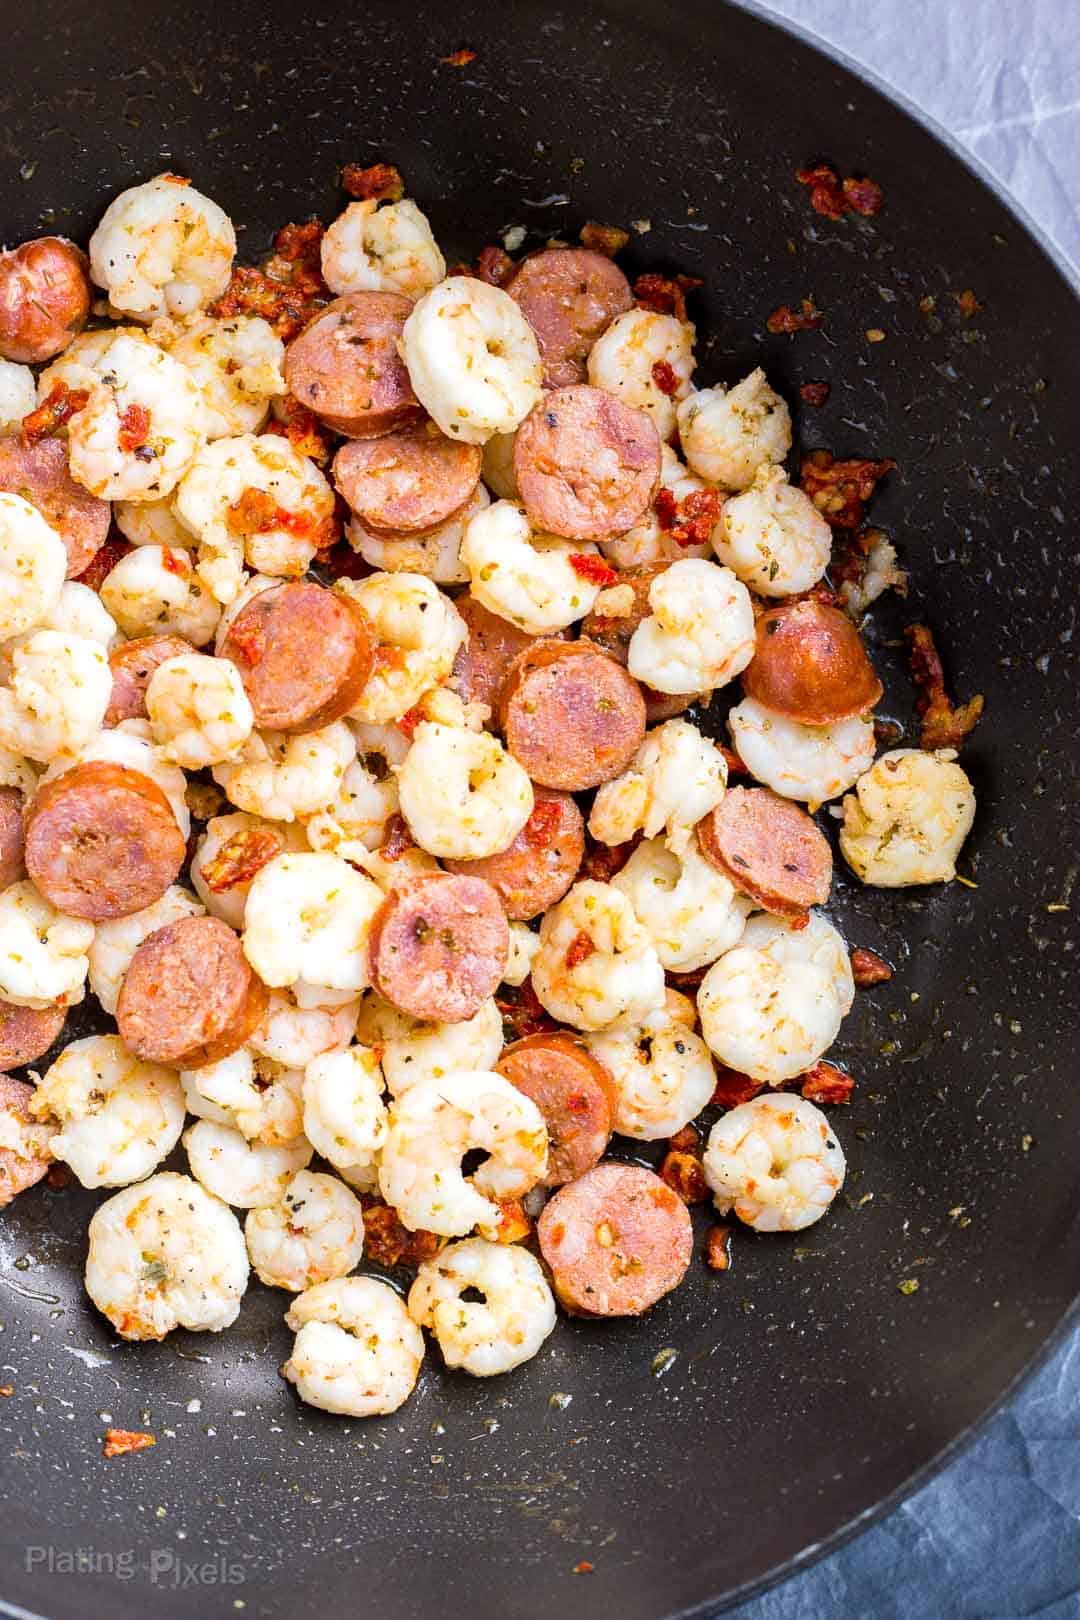 Shrimp and sausage slices cooking in pan